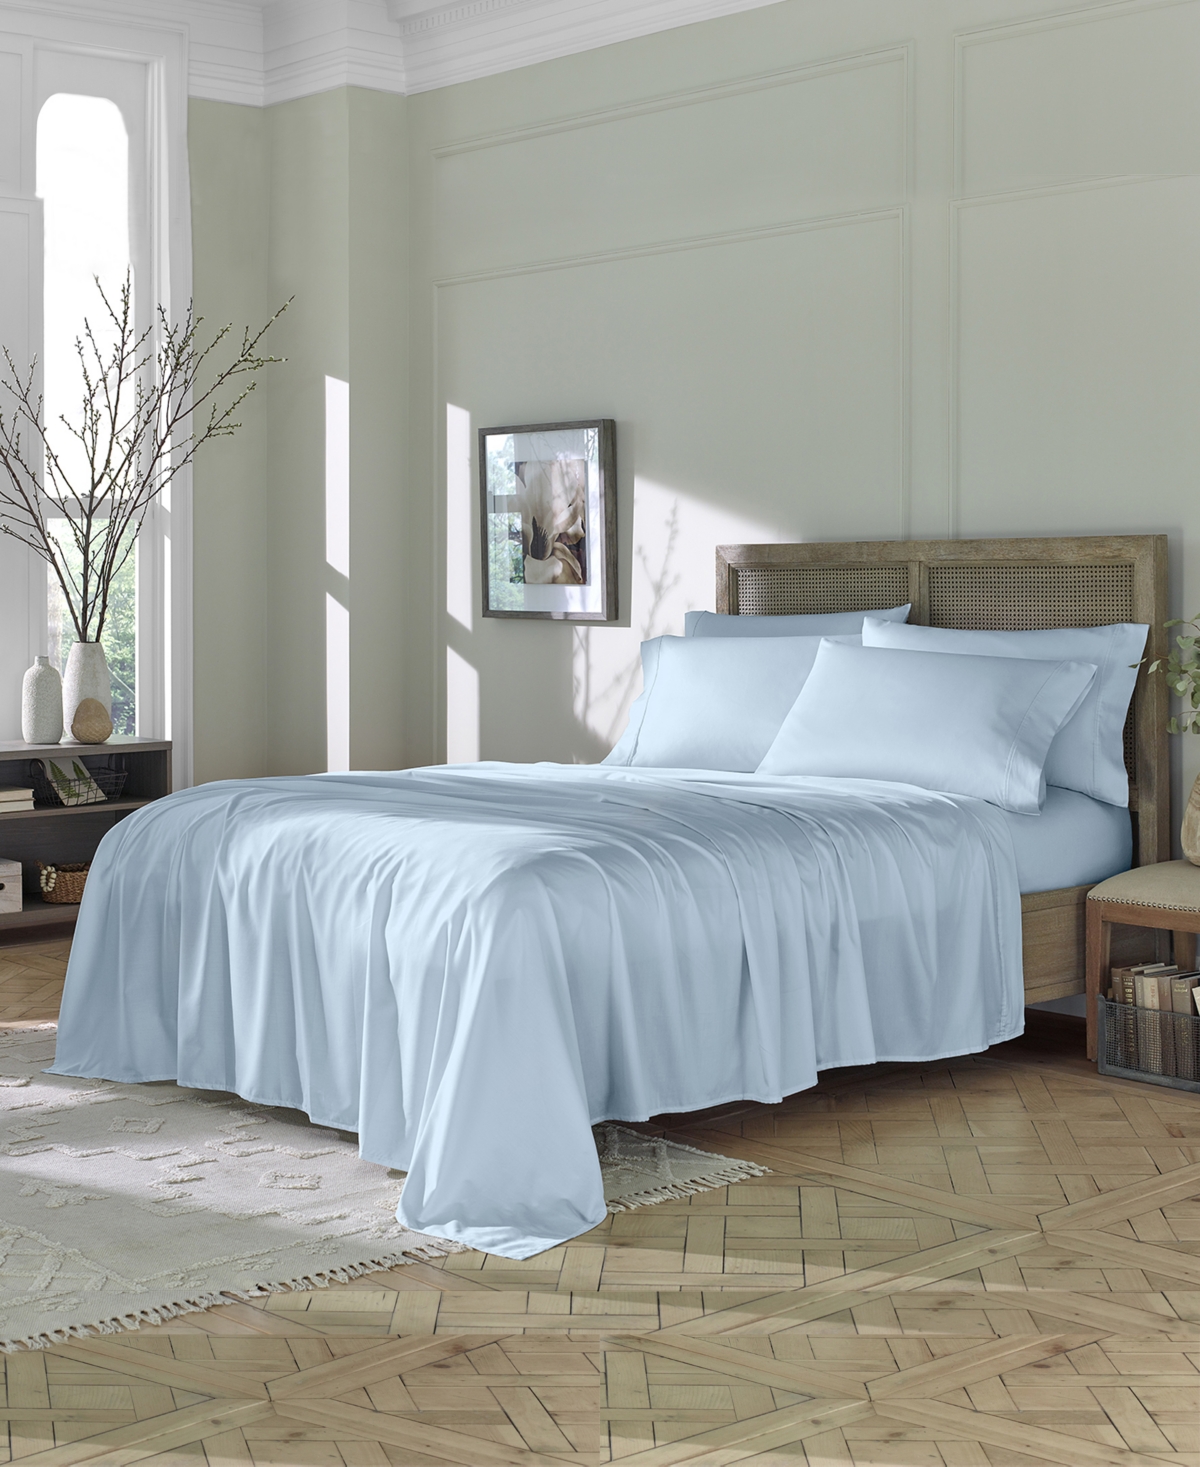 Shop Clara Clark Eucalyptus Unique Lyocell Blend Fabric Soft Natural And Durable, 6 Piece Sheet Set, King In Powder Blue